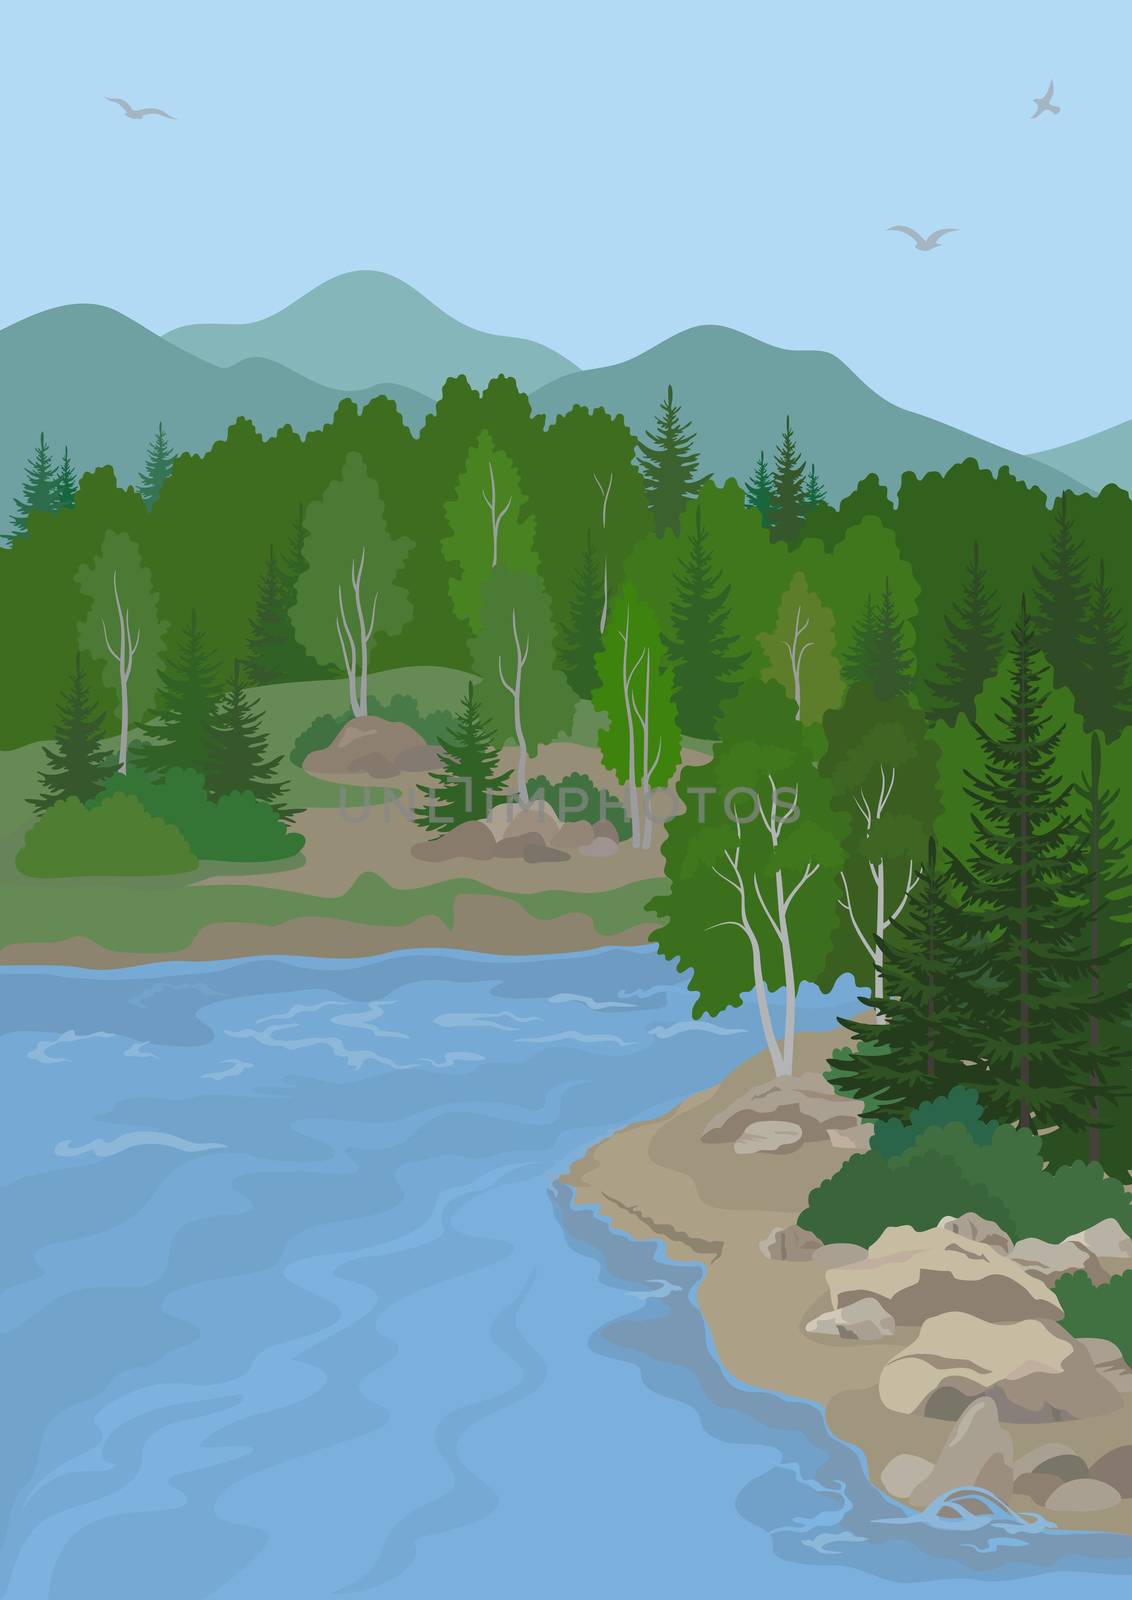 Landscape with Birch and Fir Trees on the Shore of a Mountain Lake under a Blue Sky with Birds. 